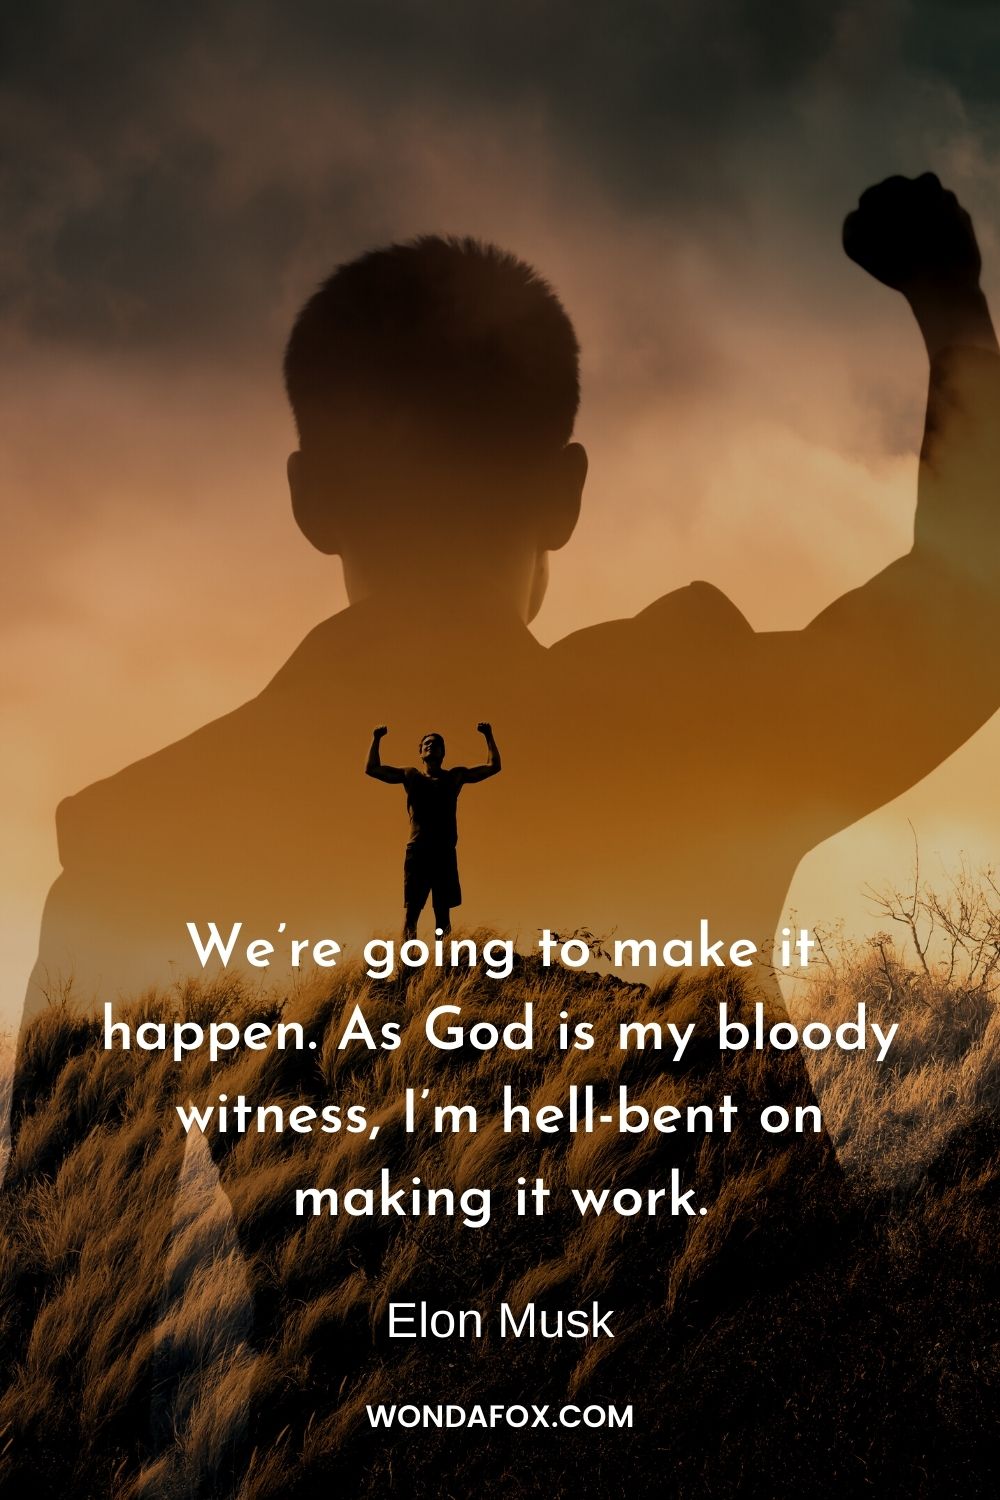 We’re going to make it happen. As God is my bloody witness, I’m hell-bent on making it work.